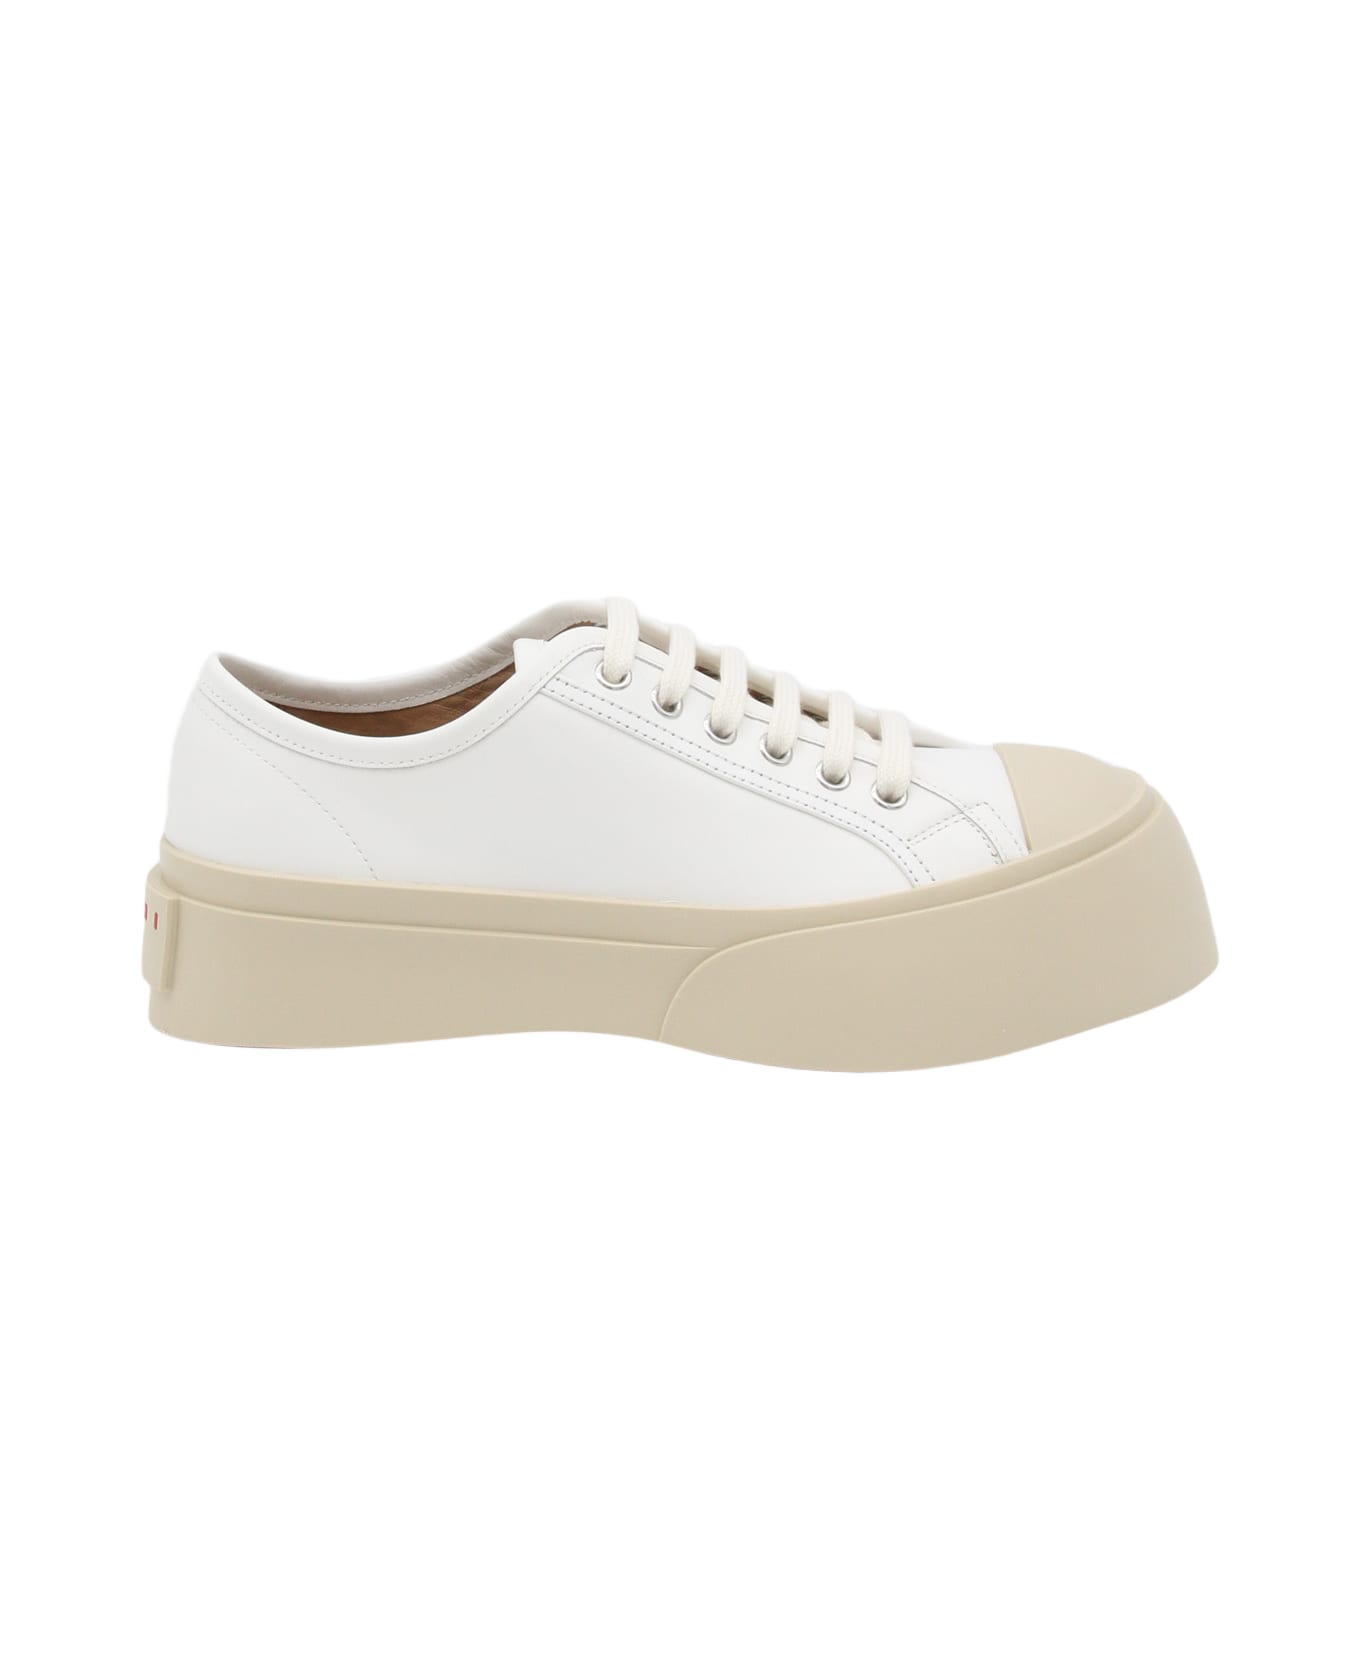 Marni White Leather Pablo Sneakers - Lily white ウェッジシューズ